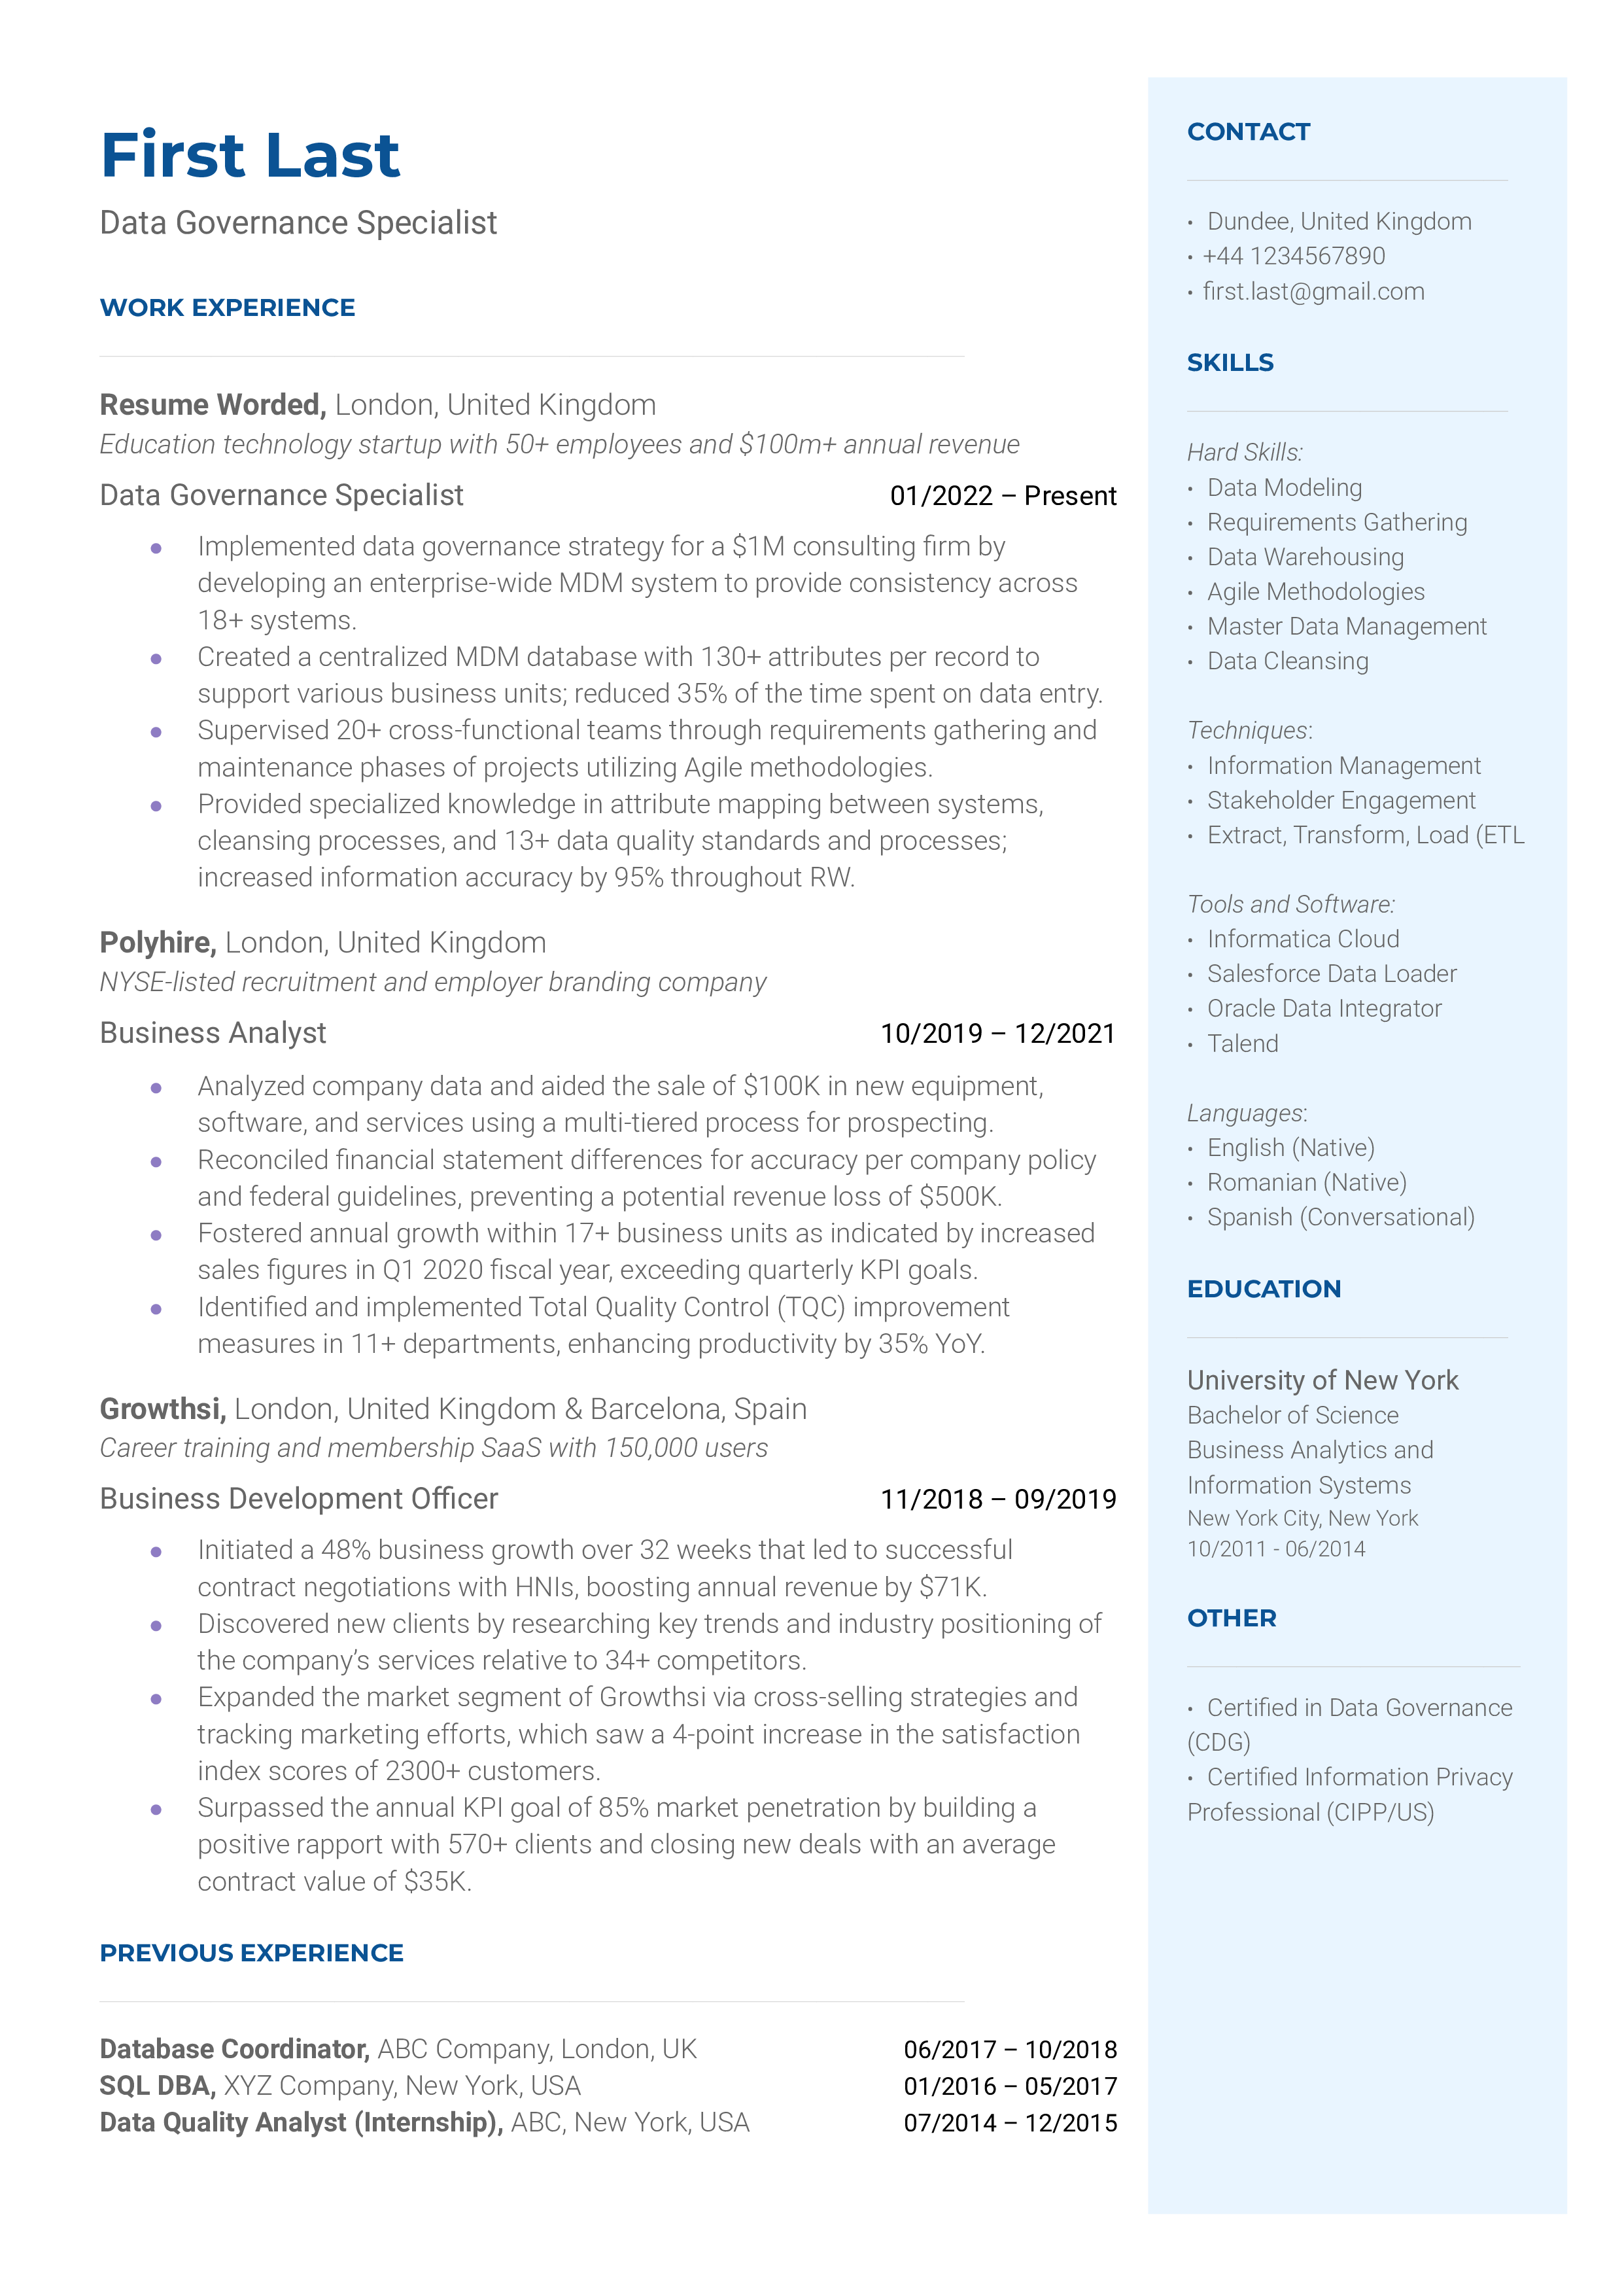 A data governance business analyst resume template including relevant certifications.